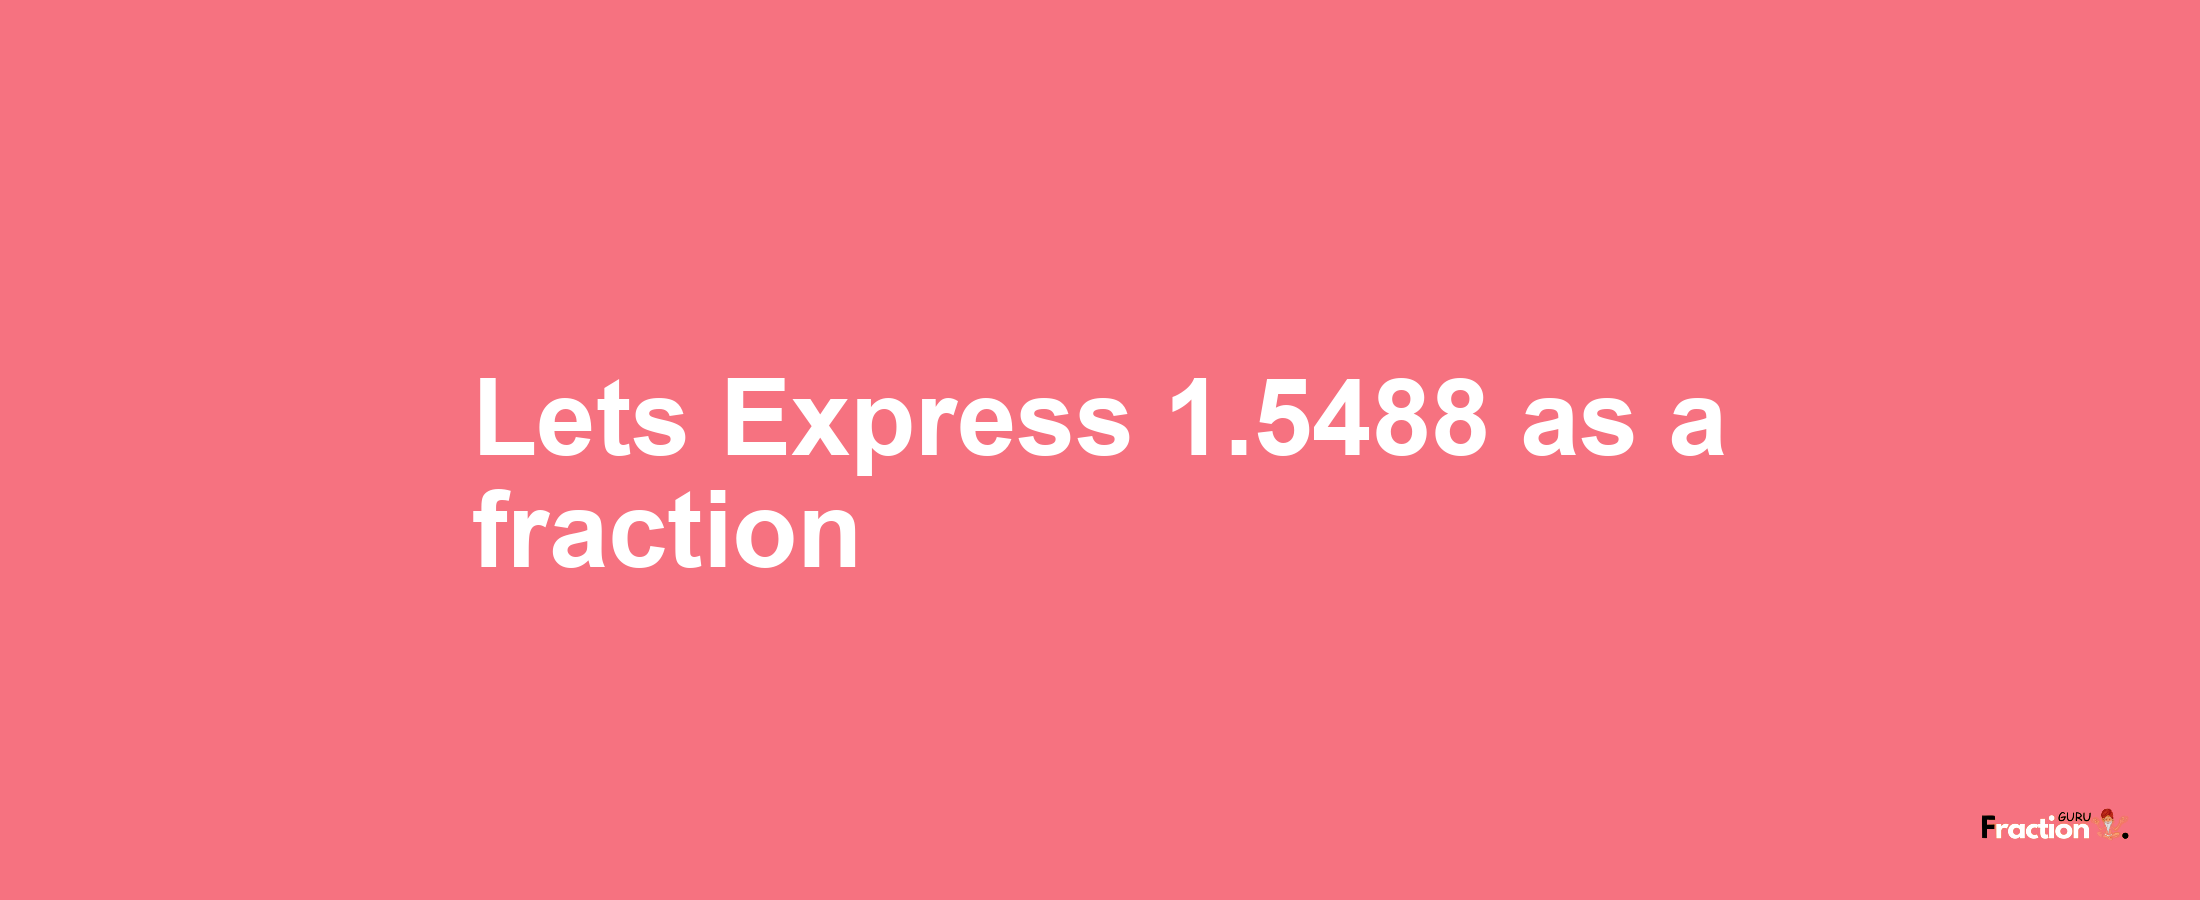 Lets Express 1.5488 as afraction